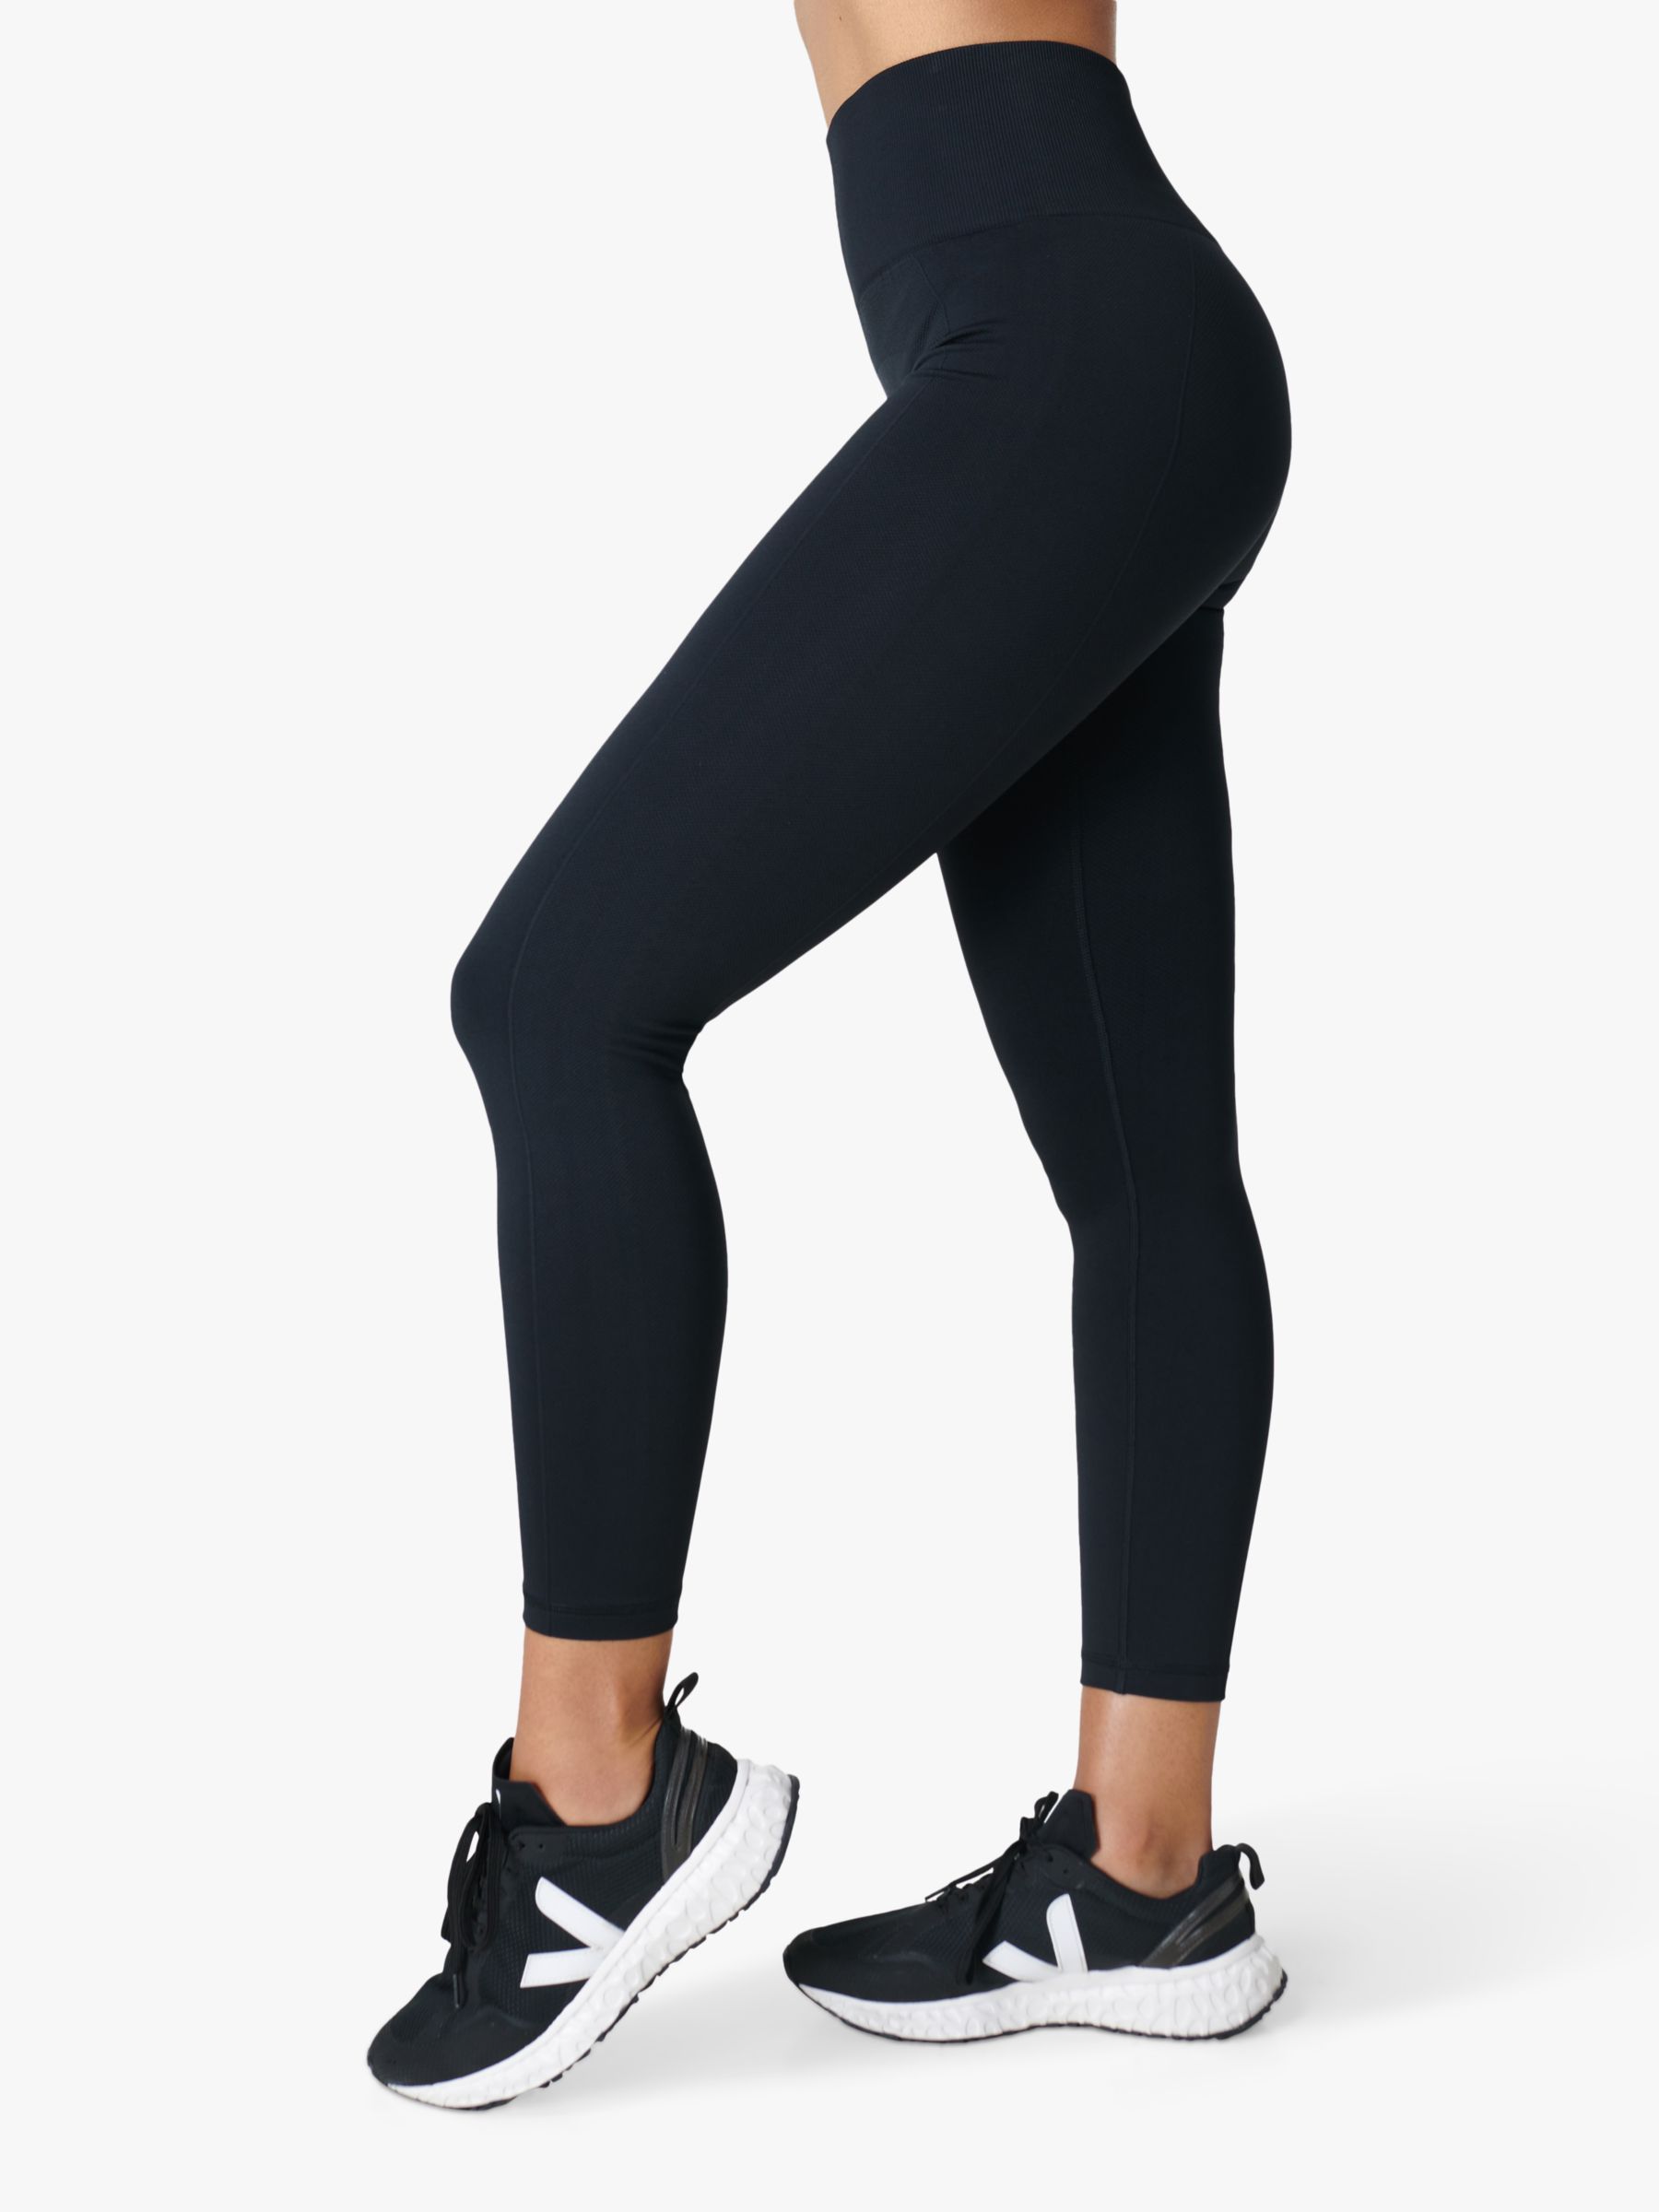 Chill out or work out in the Black Energy Seamless Leggings